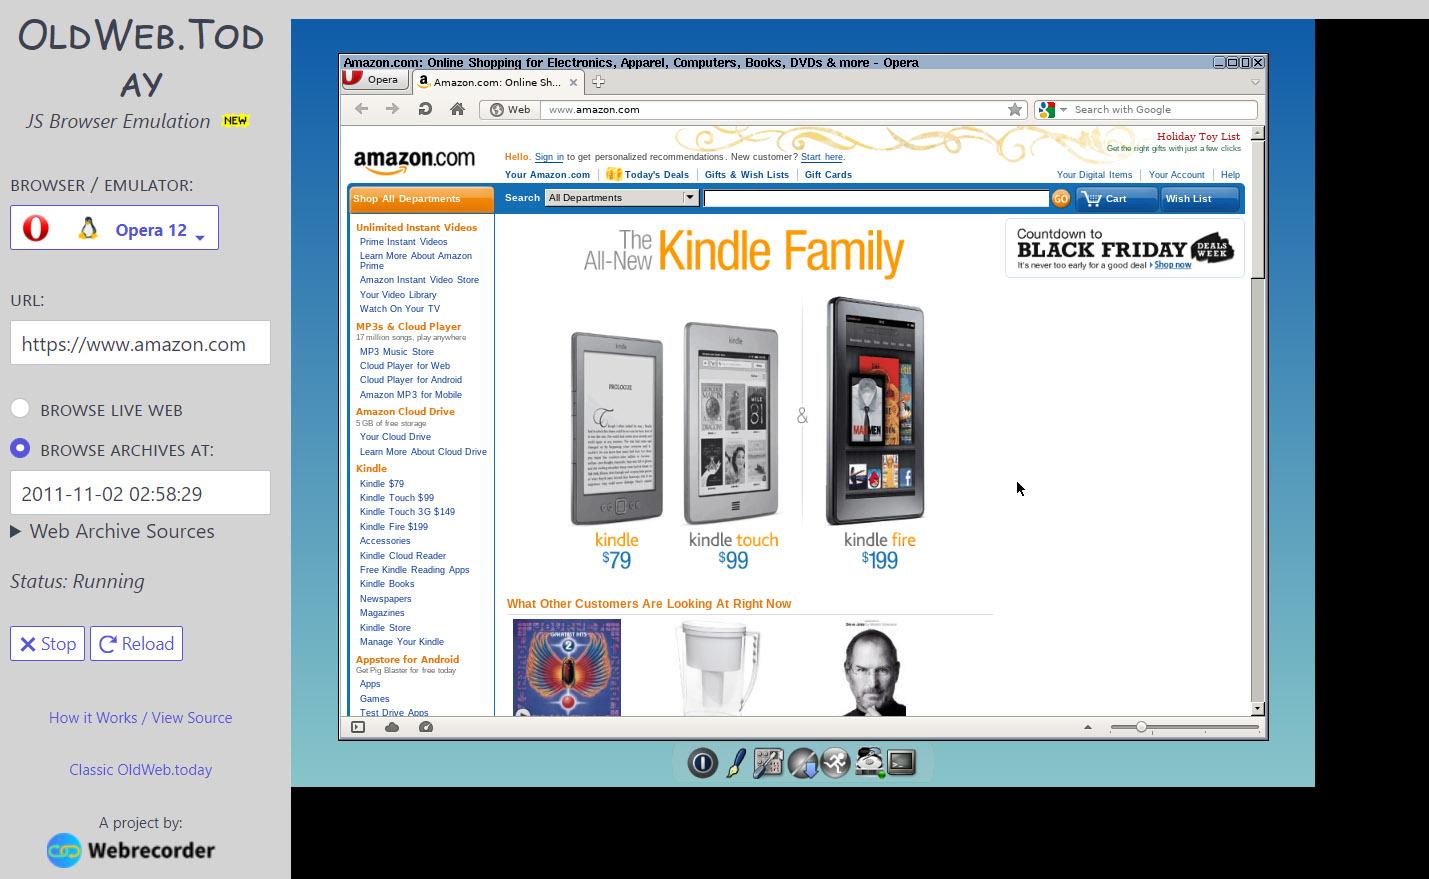 Amazon page on November 2, 2011 (Source: Oldweb.today/Reproduction)